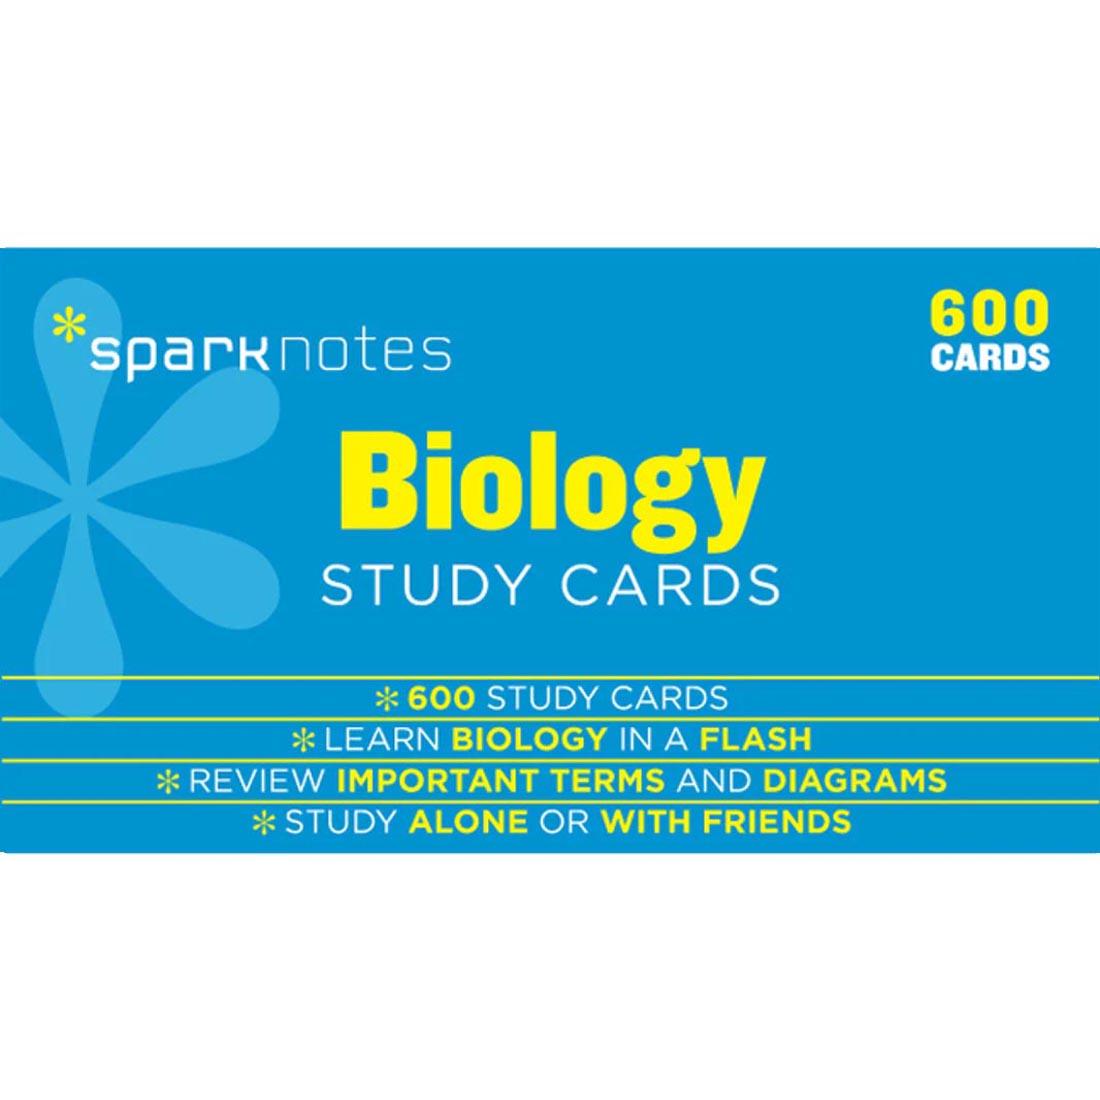 SparkNotes Biology Study Cards